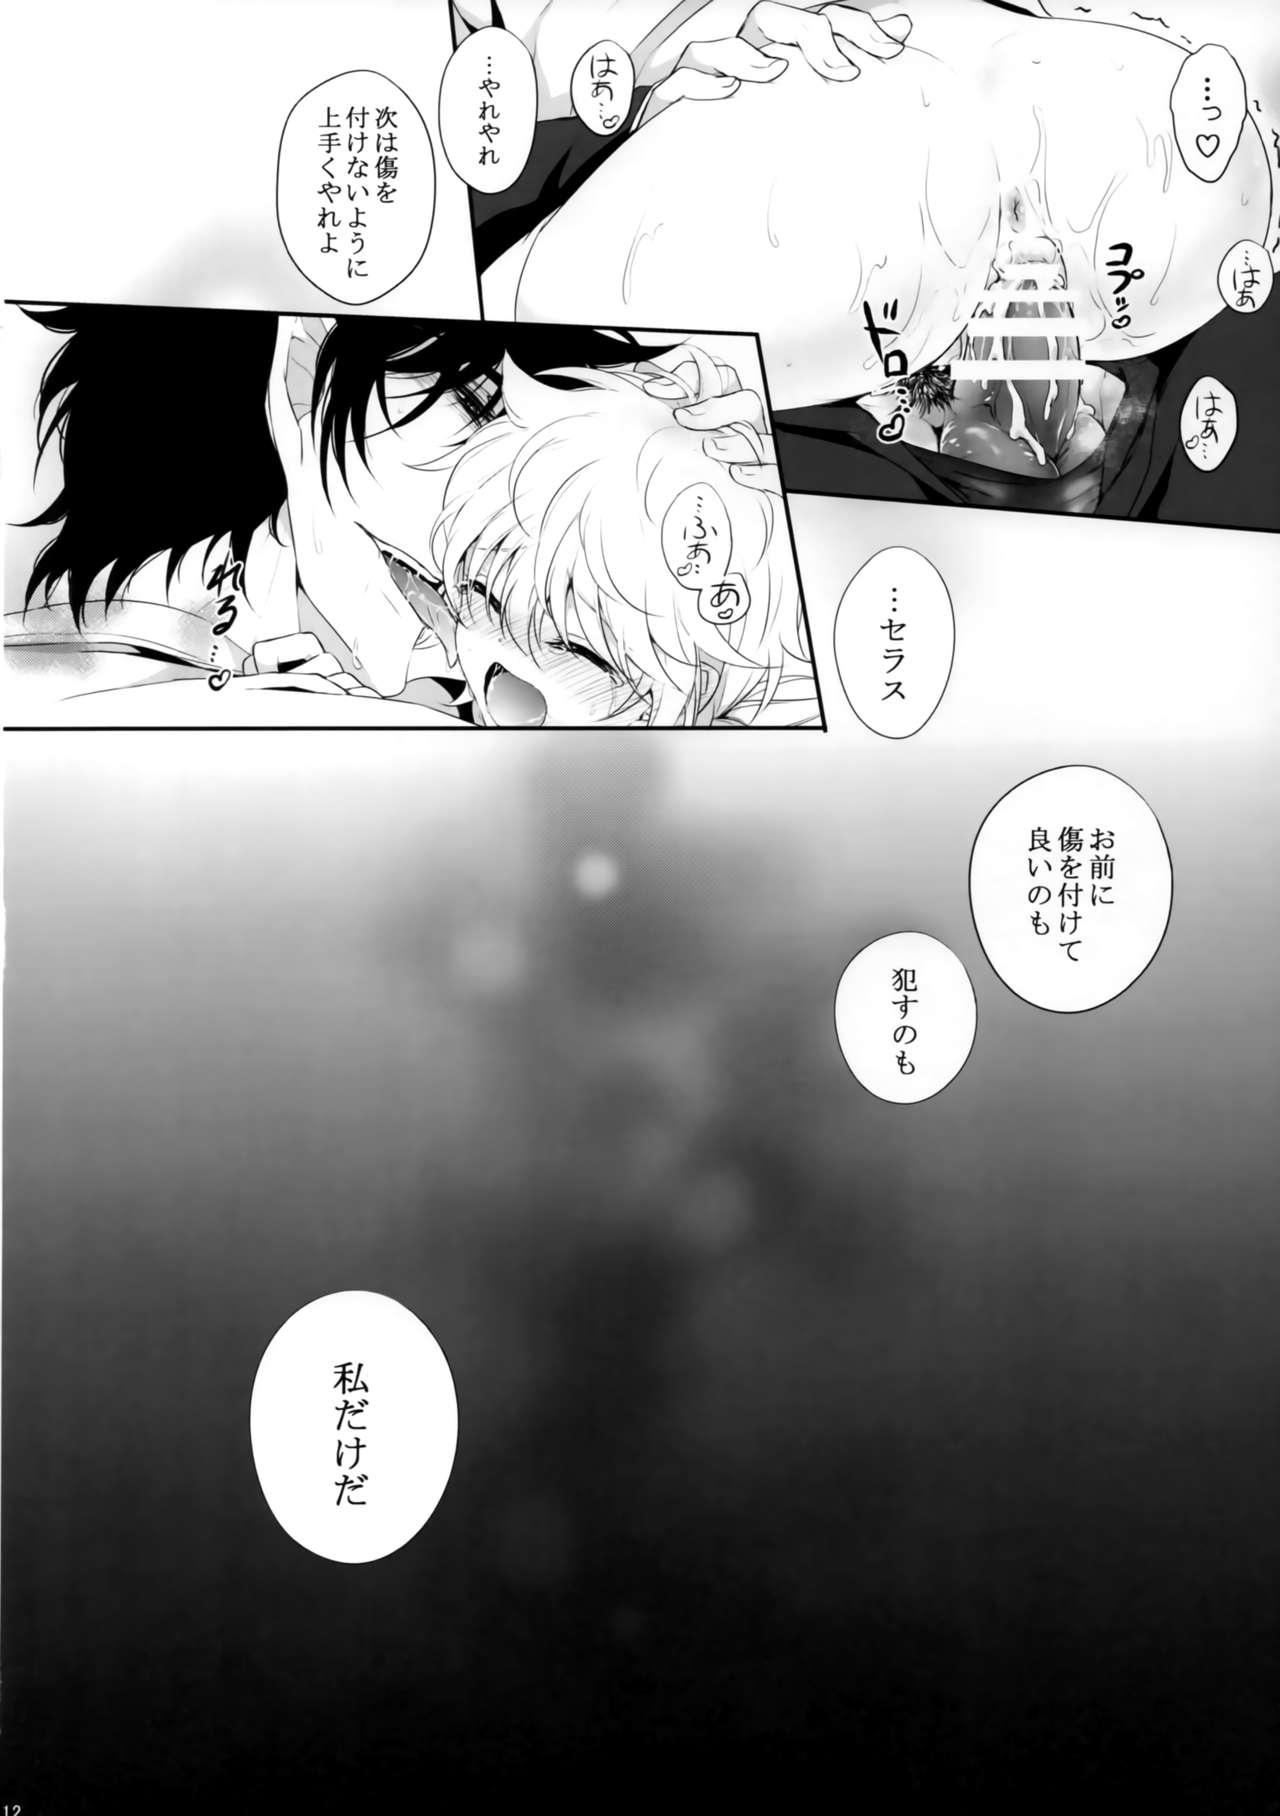 Load Exclusive Treatment - Hellsing Collar - Page 11